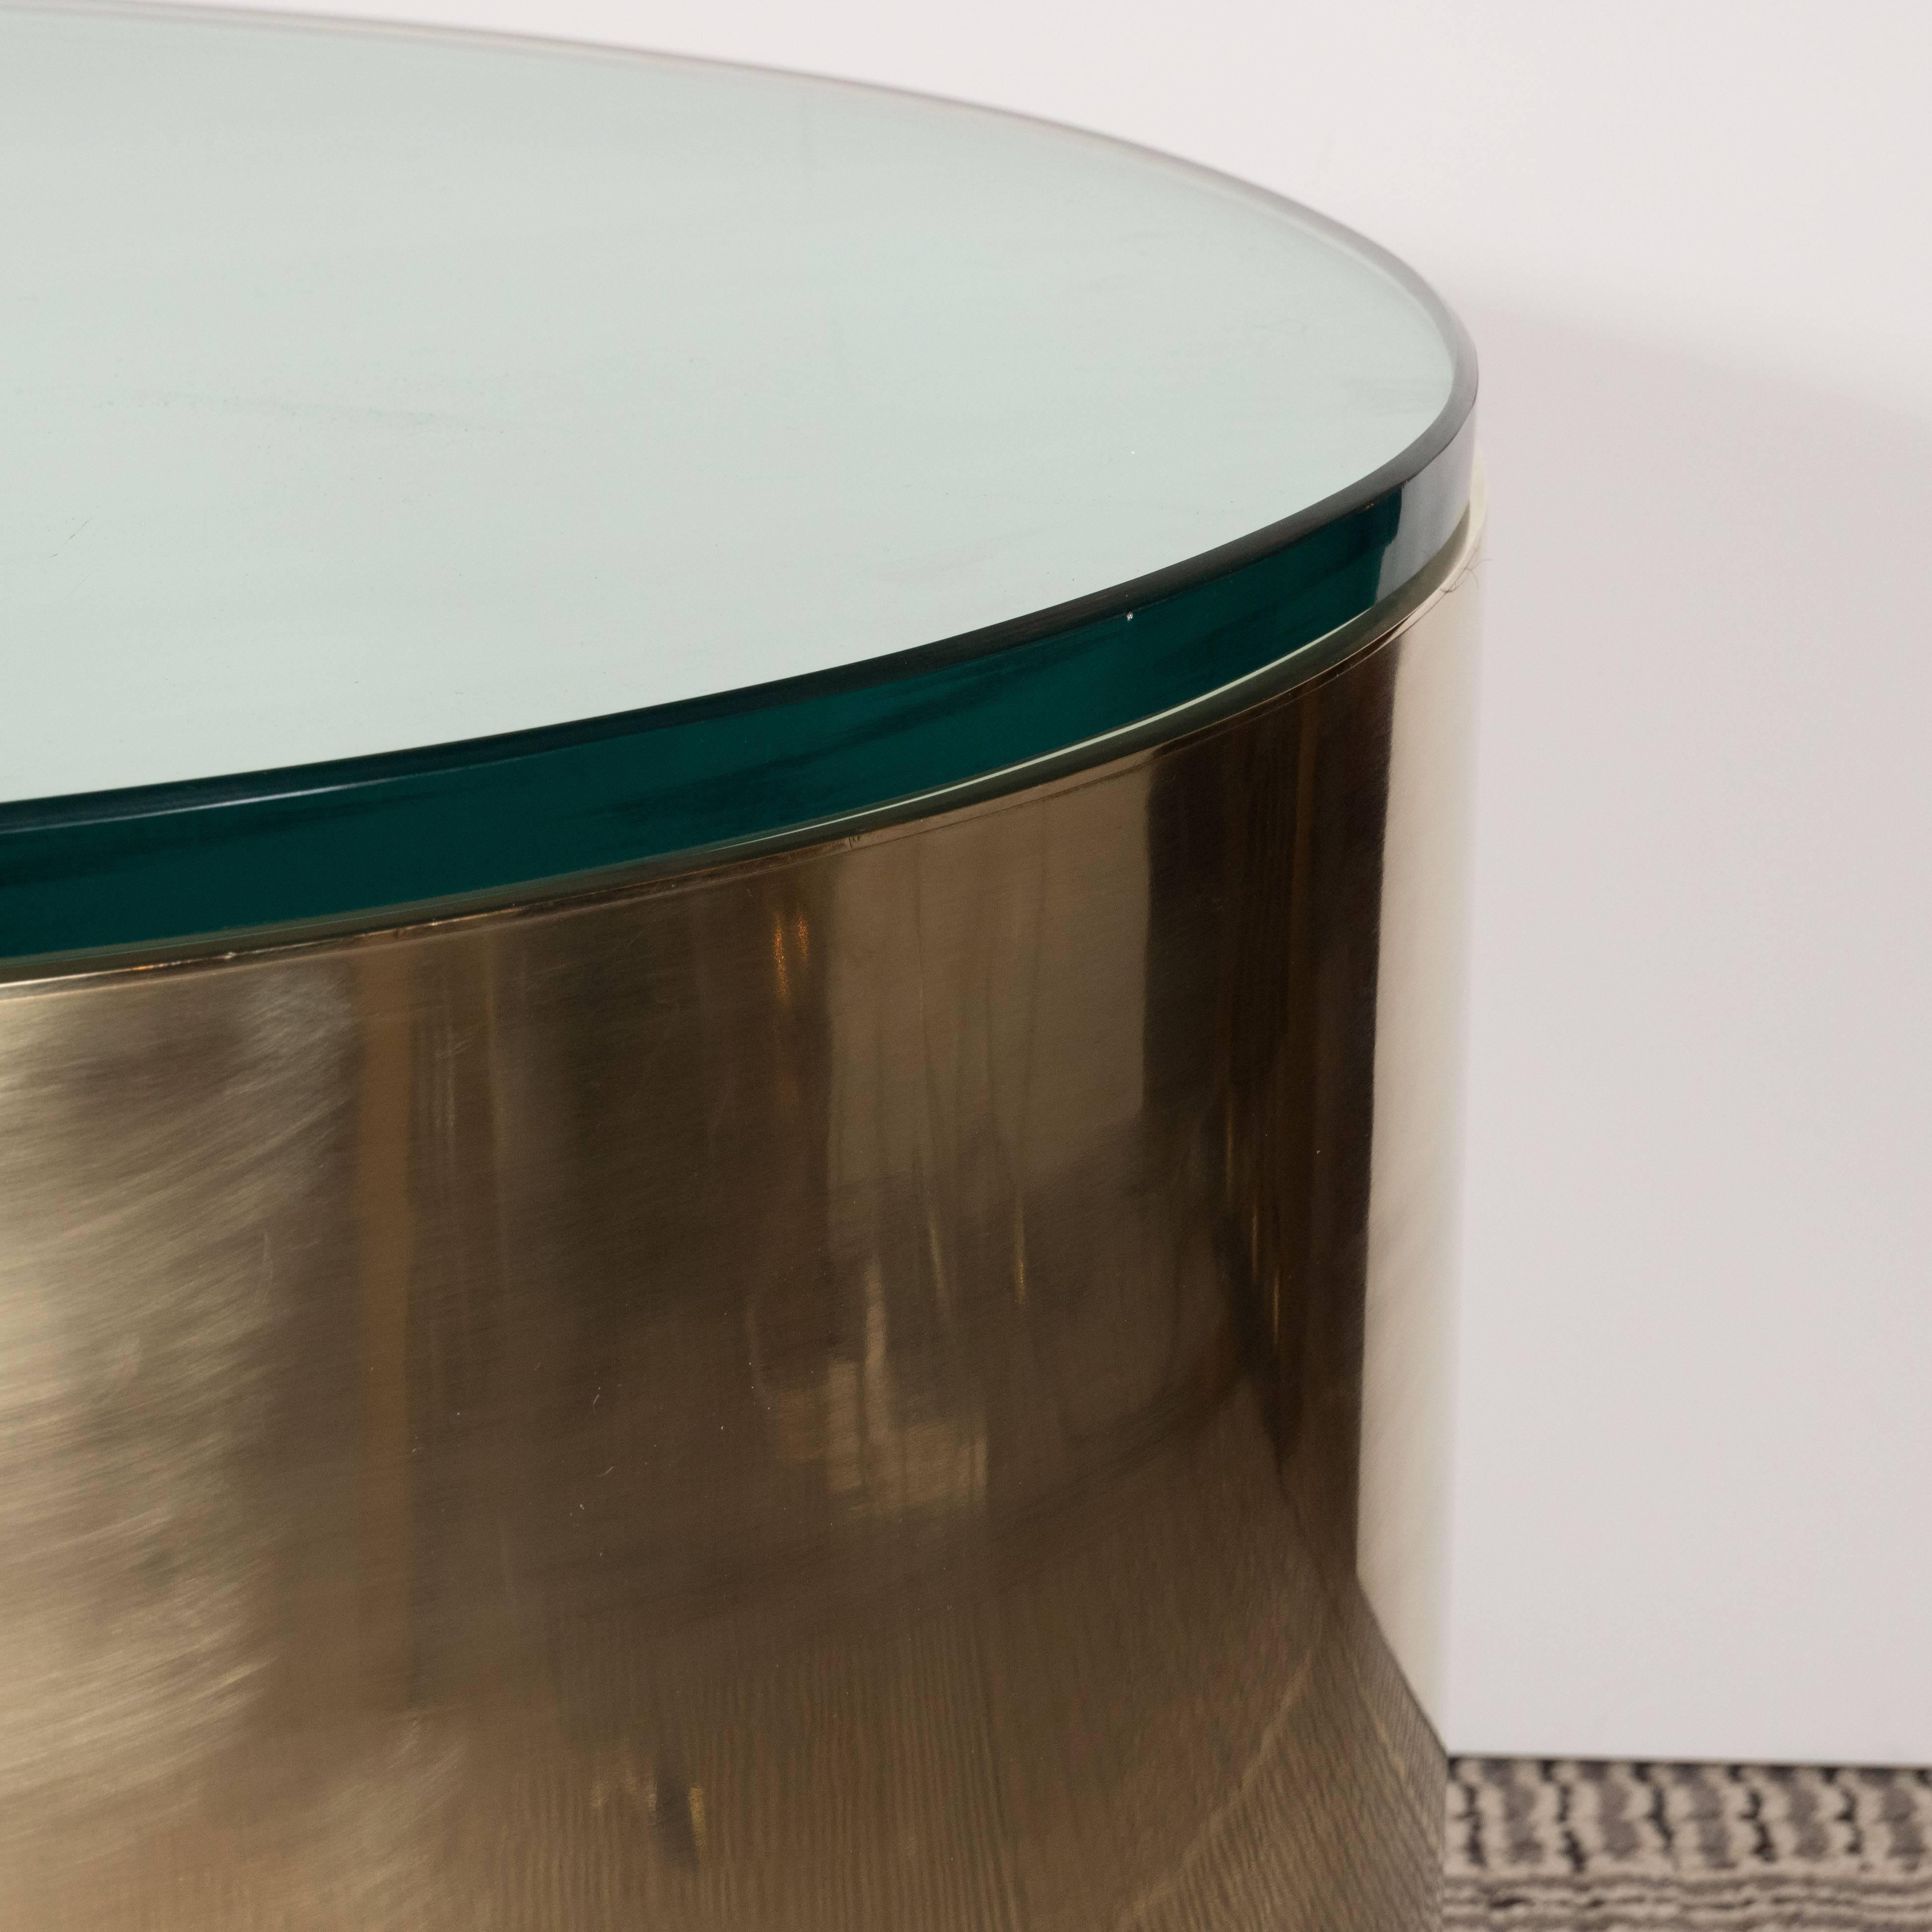 Late 20th Century Mid-Century Modern Brass and Glass Cocktail Table in the Manner of Karl Springer